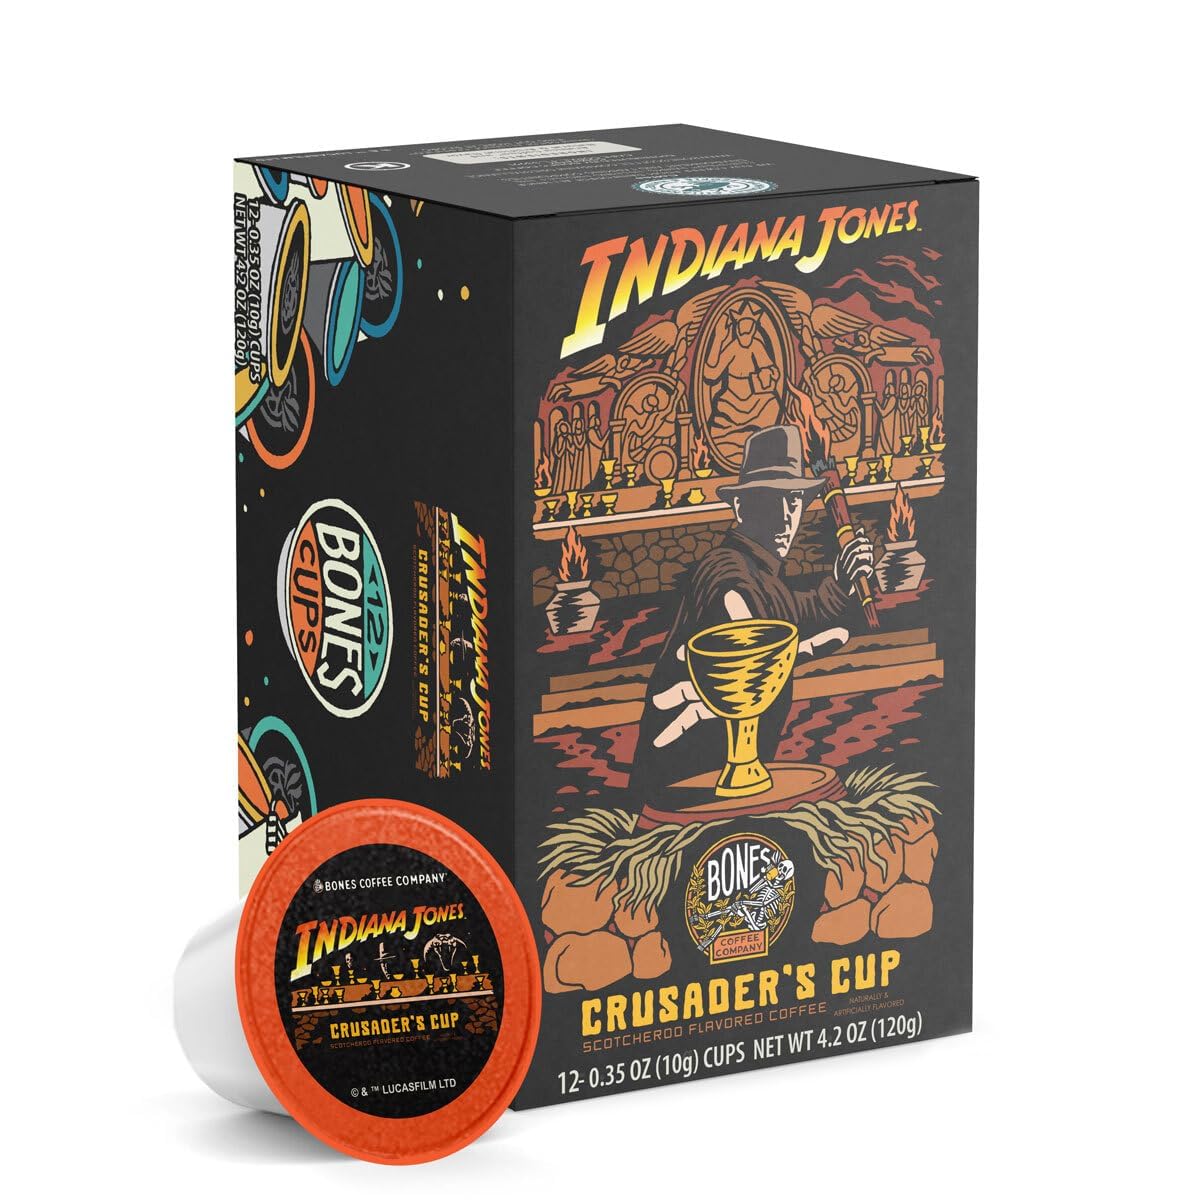 Bones Coffee Company Flavored Coffee Bones Cups Crusader's Cup Flavored Pods | 12ct Single-Serve Coffee Pods Inspired by Indiana Jones